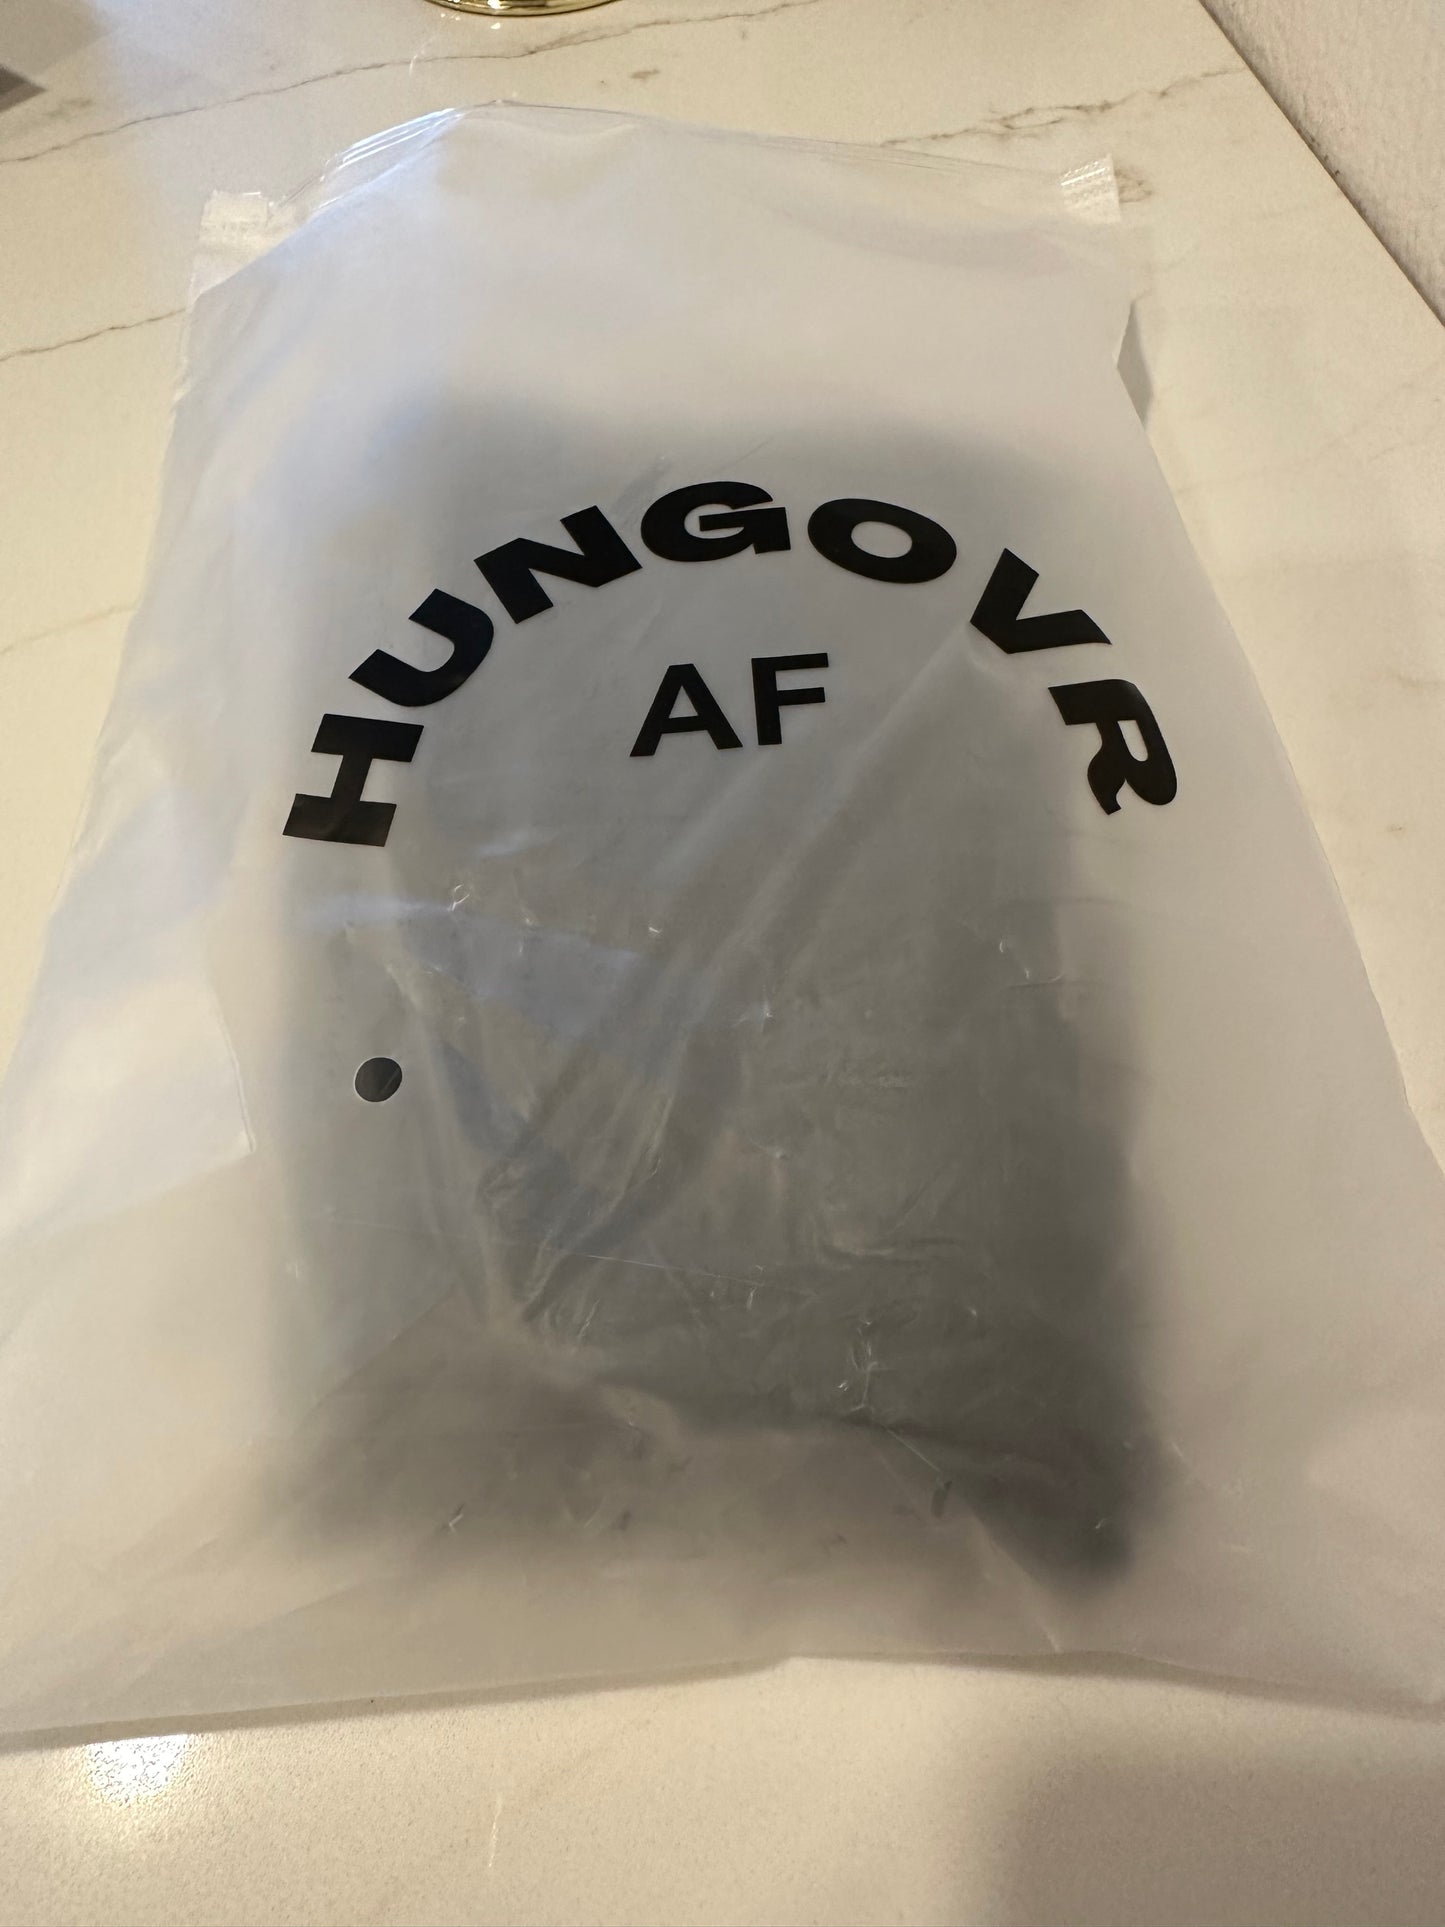 HUNGOVRAF Cooling Hangover and Headache Cap - Black